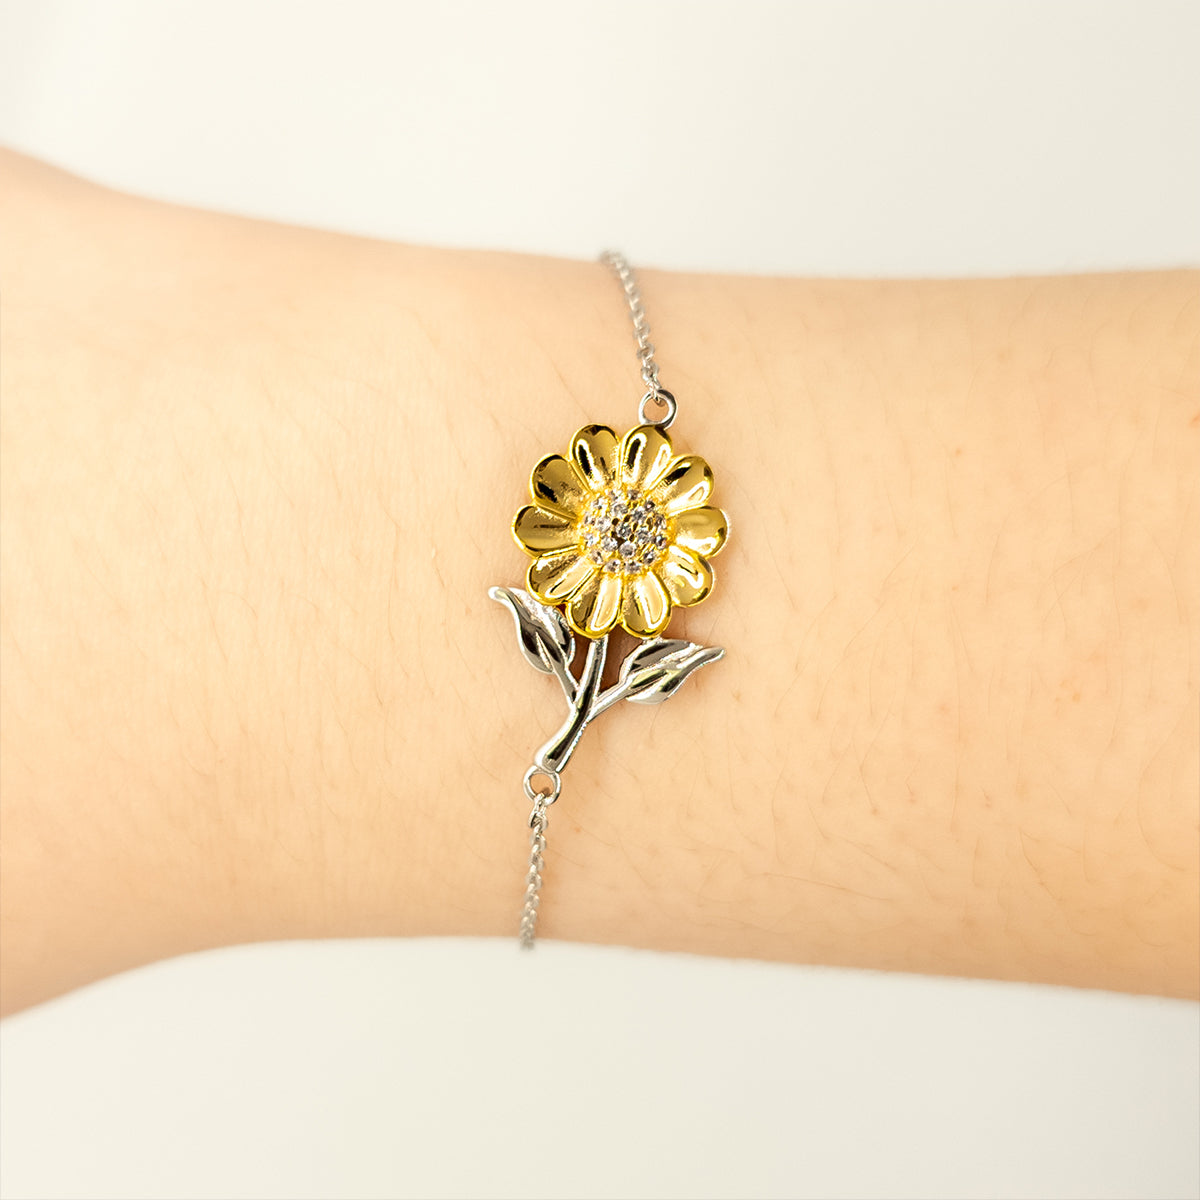 Niece Sunflower Bracelet, Never forget that I love you forever, Inspirational Niece Birthday Unique Gifts From Auntie